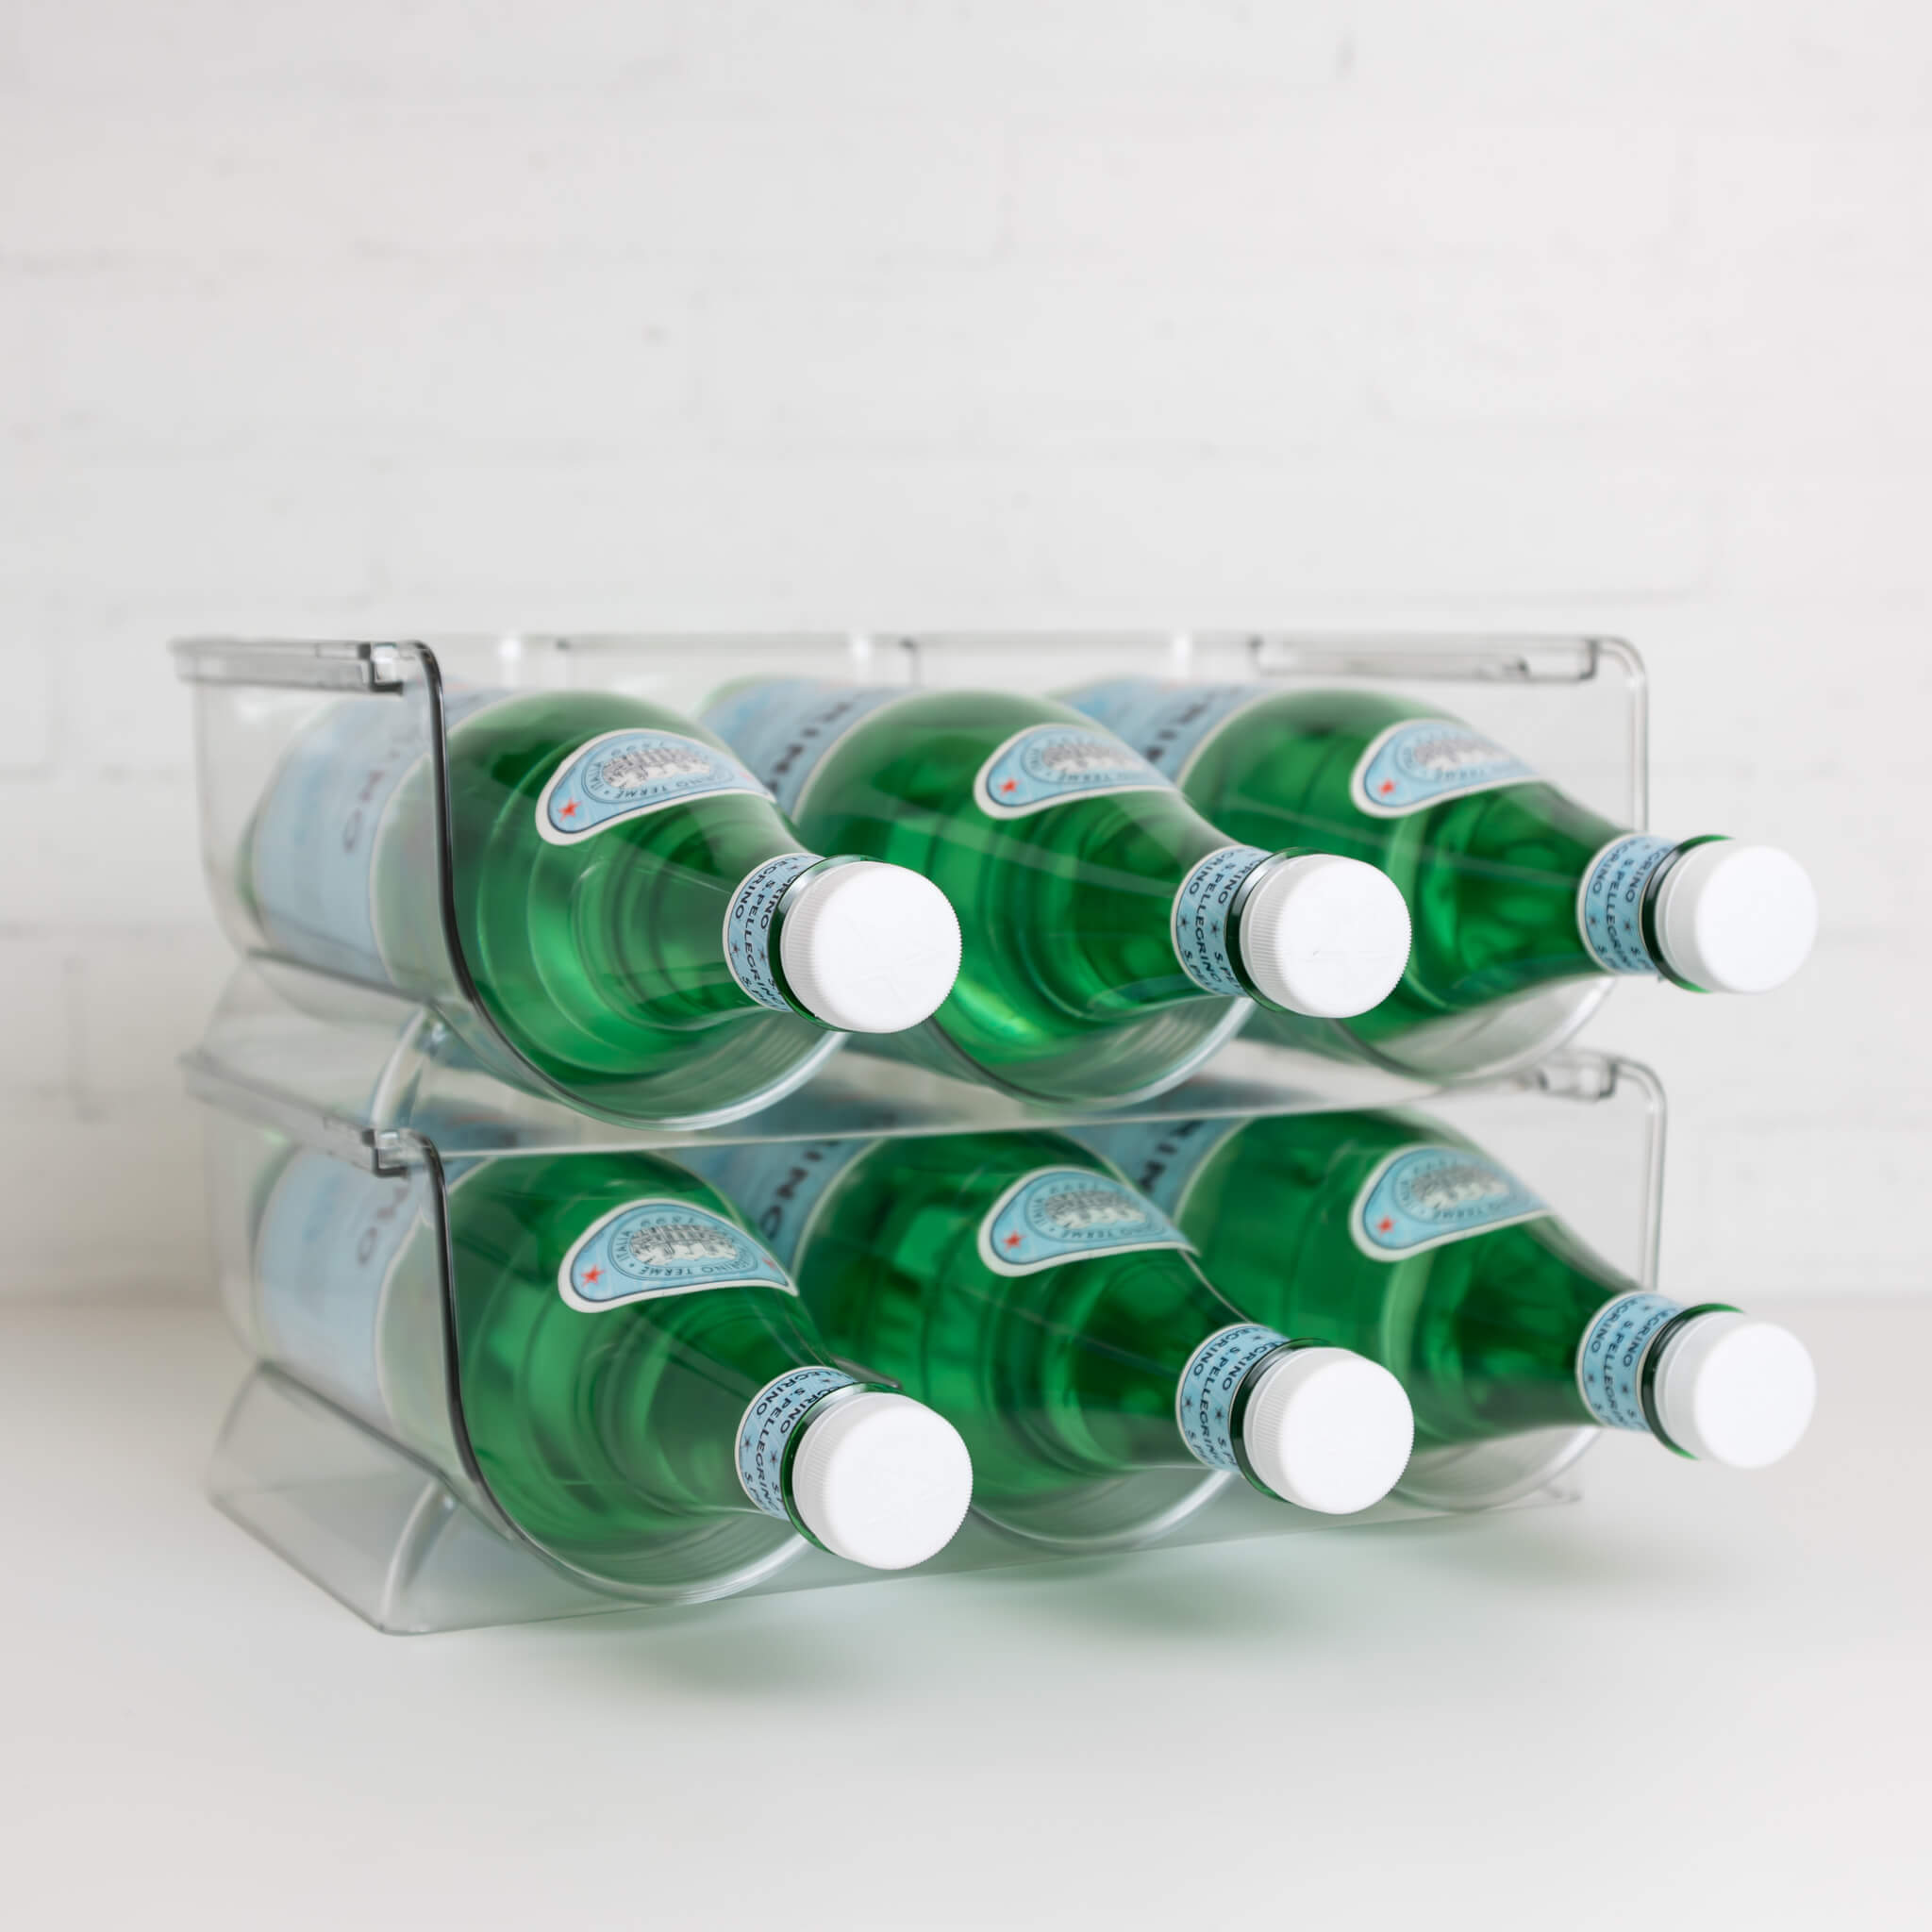 https://cdn.shopify.com/s/files/1/1879/7605/products/Clear-Fridge-3-Wine-Holder-Stackable.jpg?v=1676293717